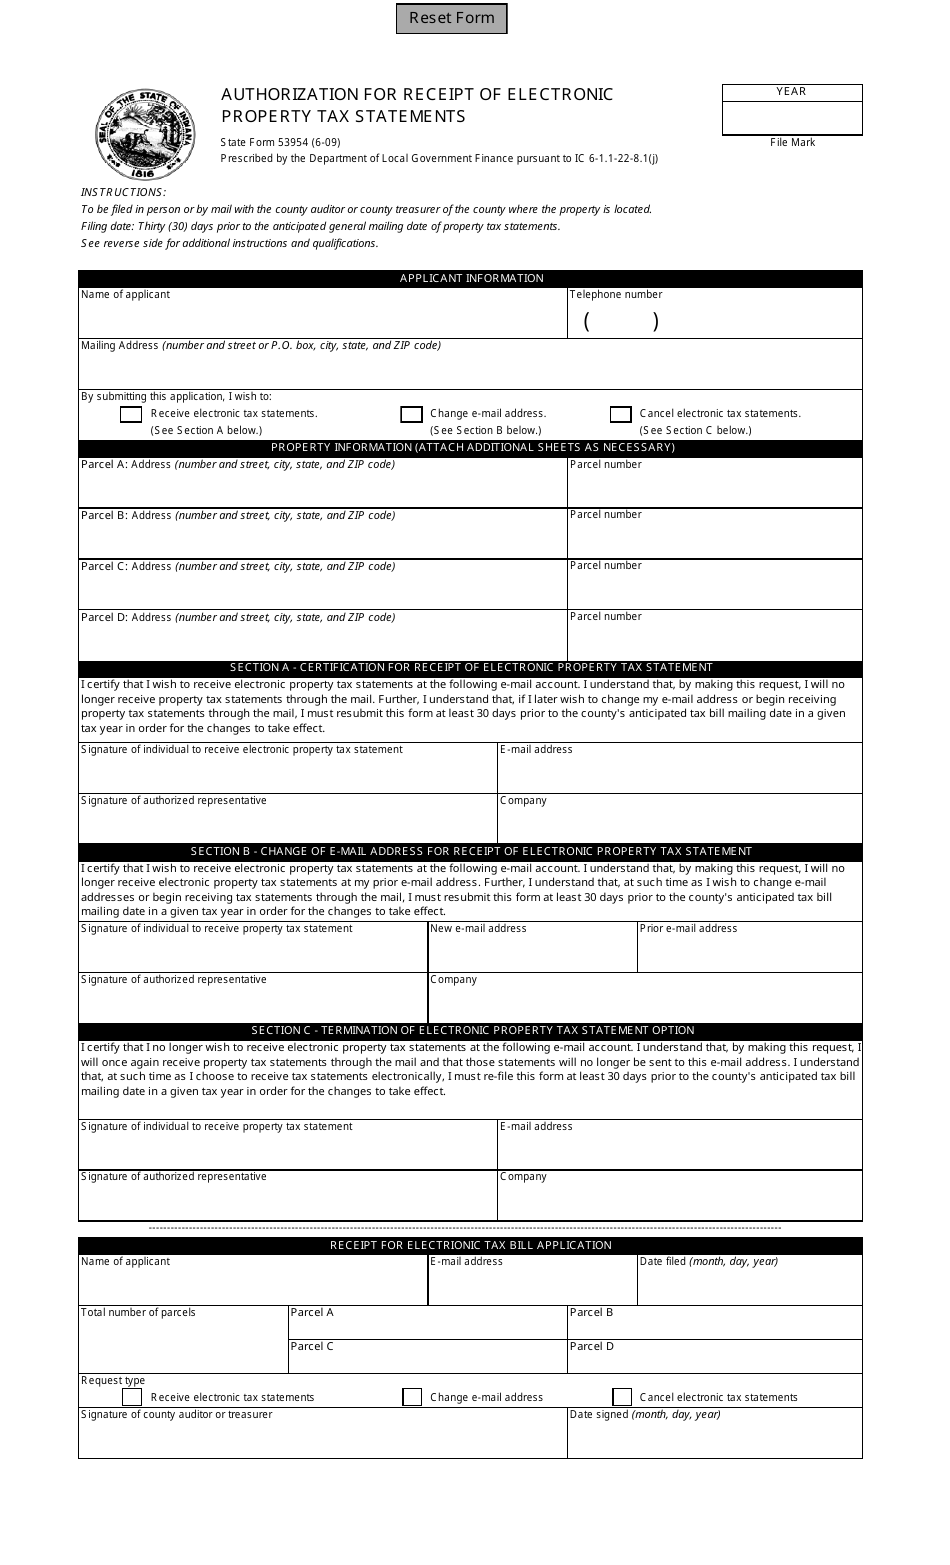 State Form 53954 Authorization for Receipt of Electronic Property Tax Statements - Indiana, Page 1